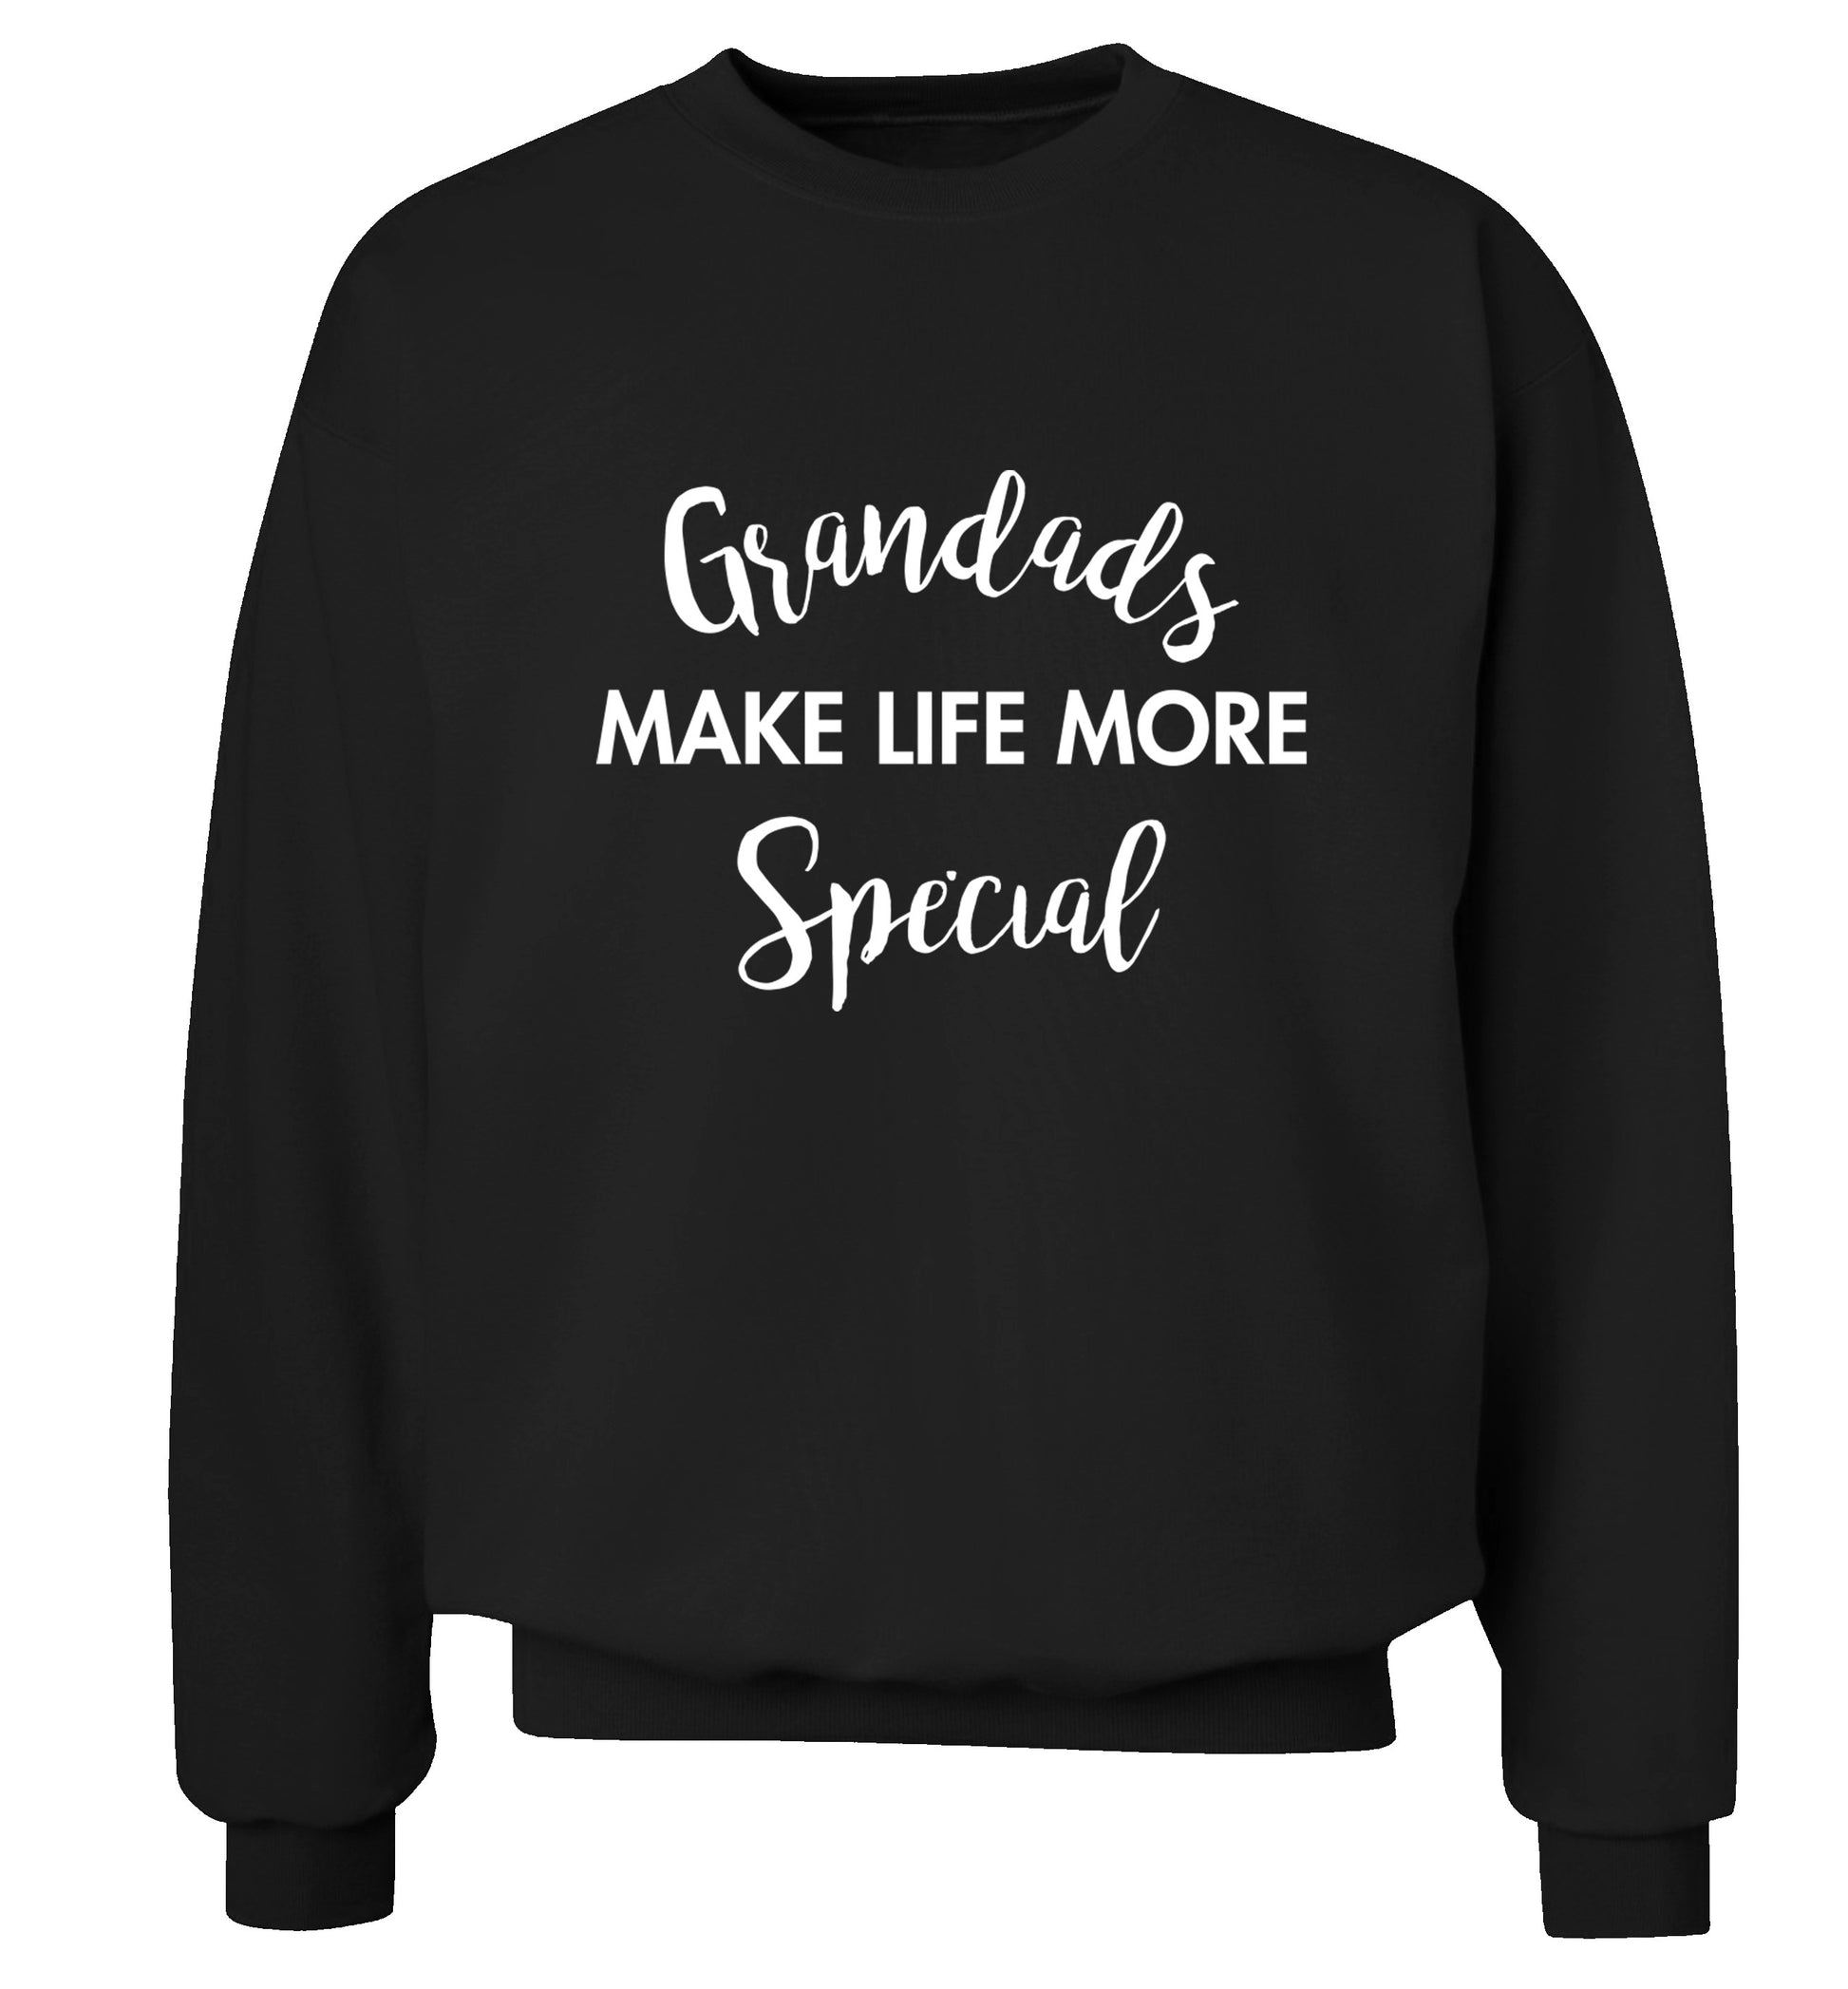 Grandads make life more special Adult's unisex black Sweater 2XL